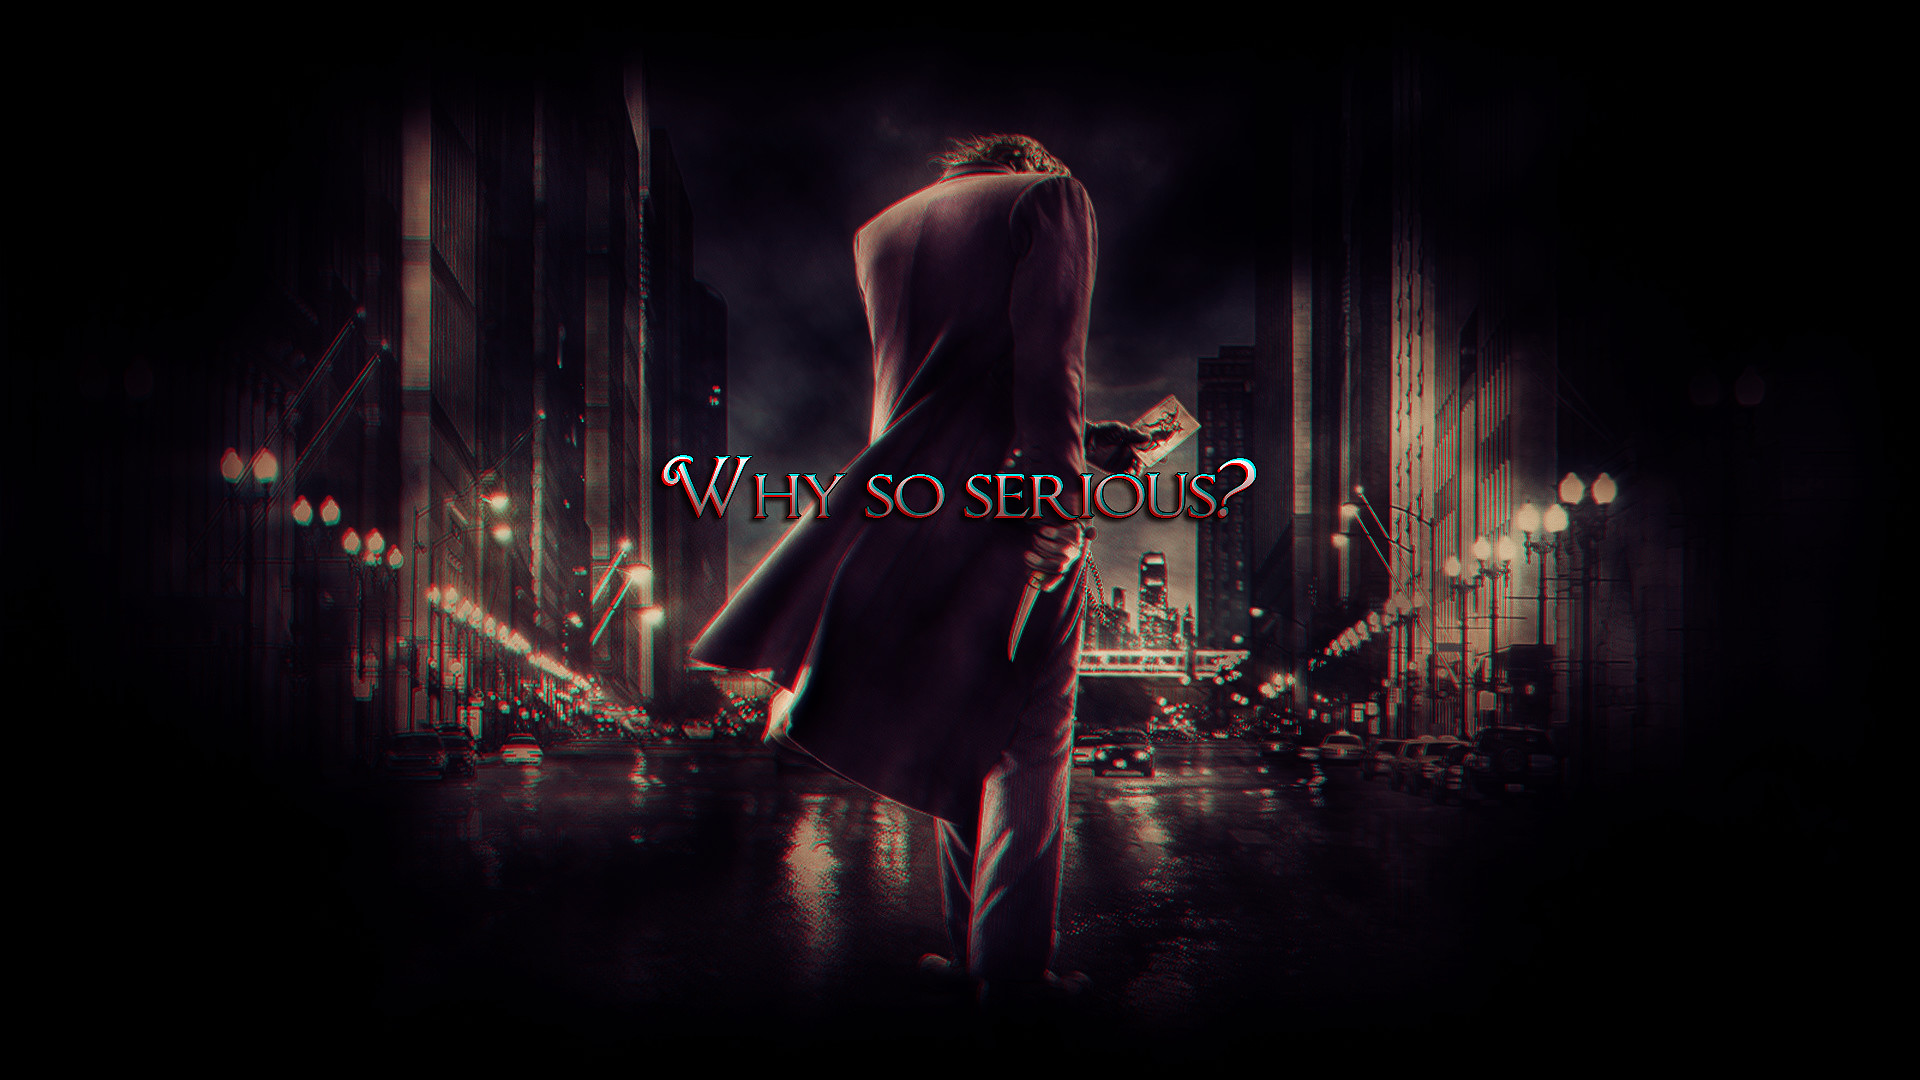 why so serious wallpaper,darkness,photography,cg artwork,digital compositing,performance